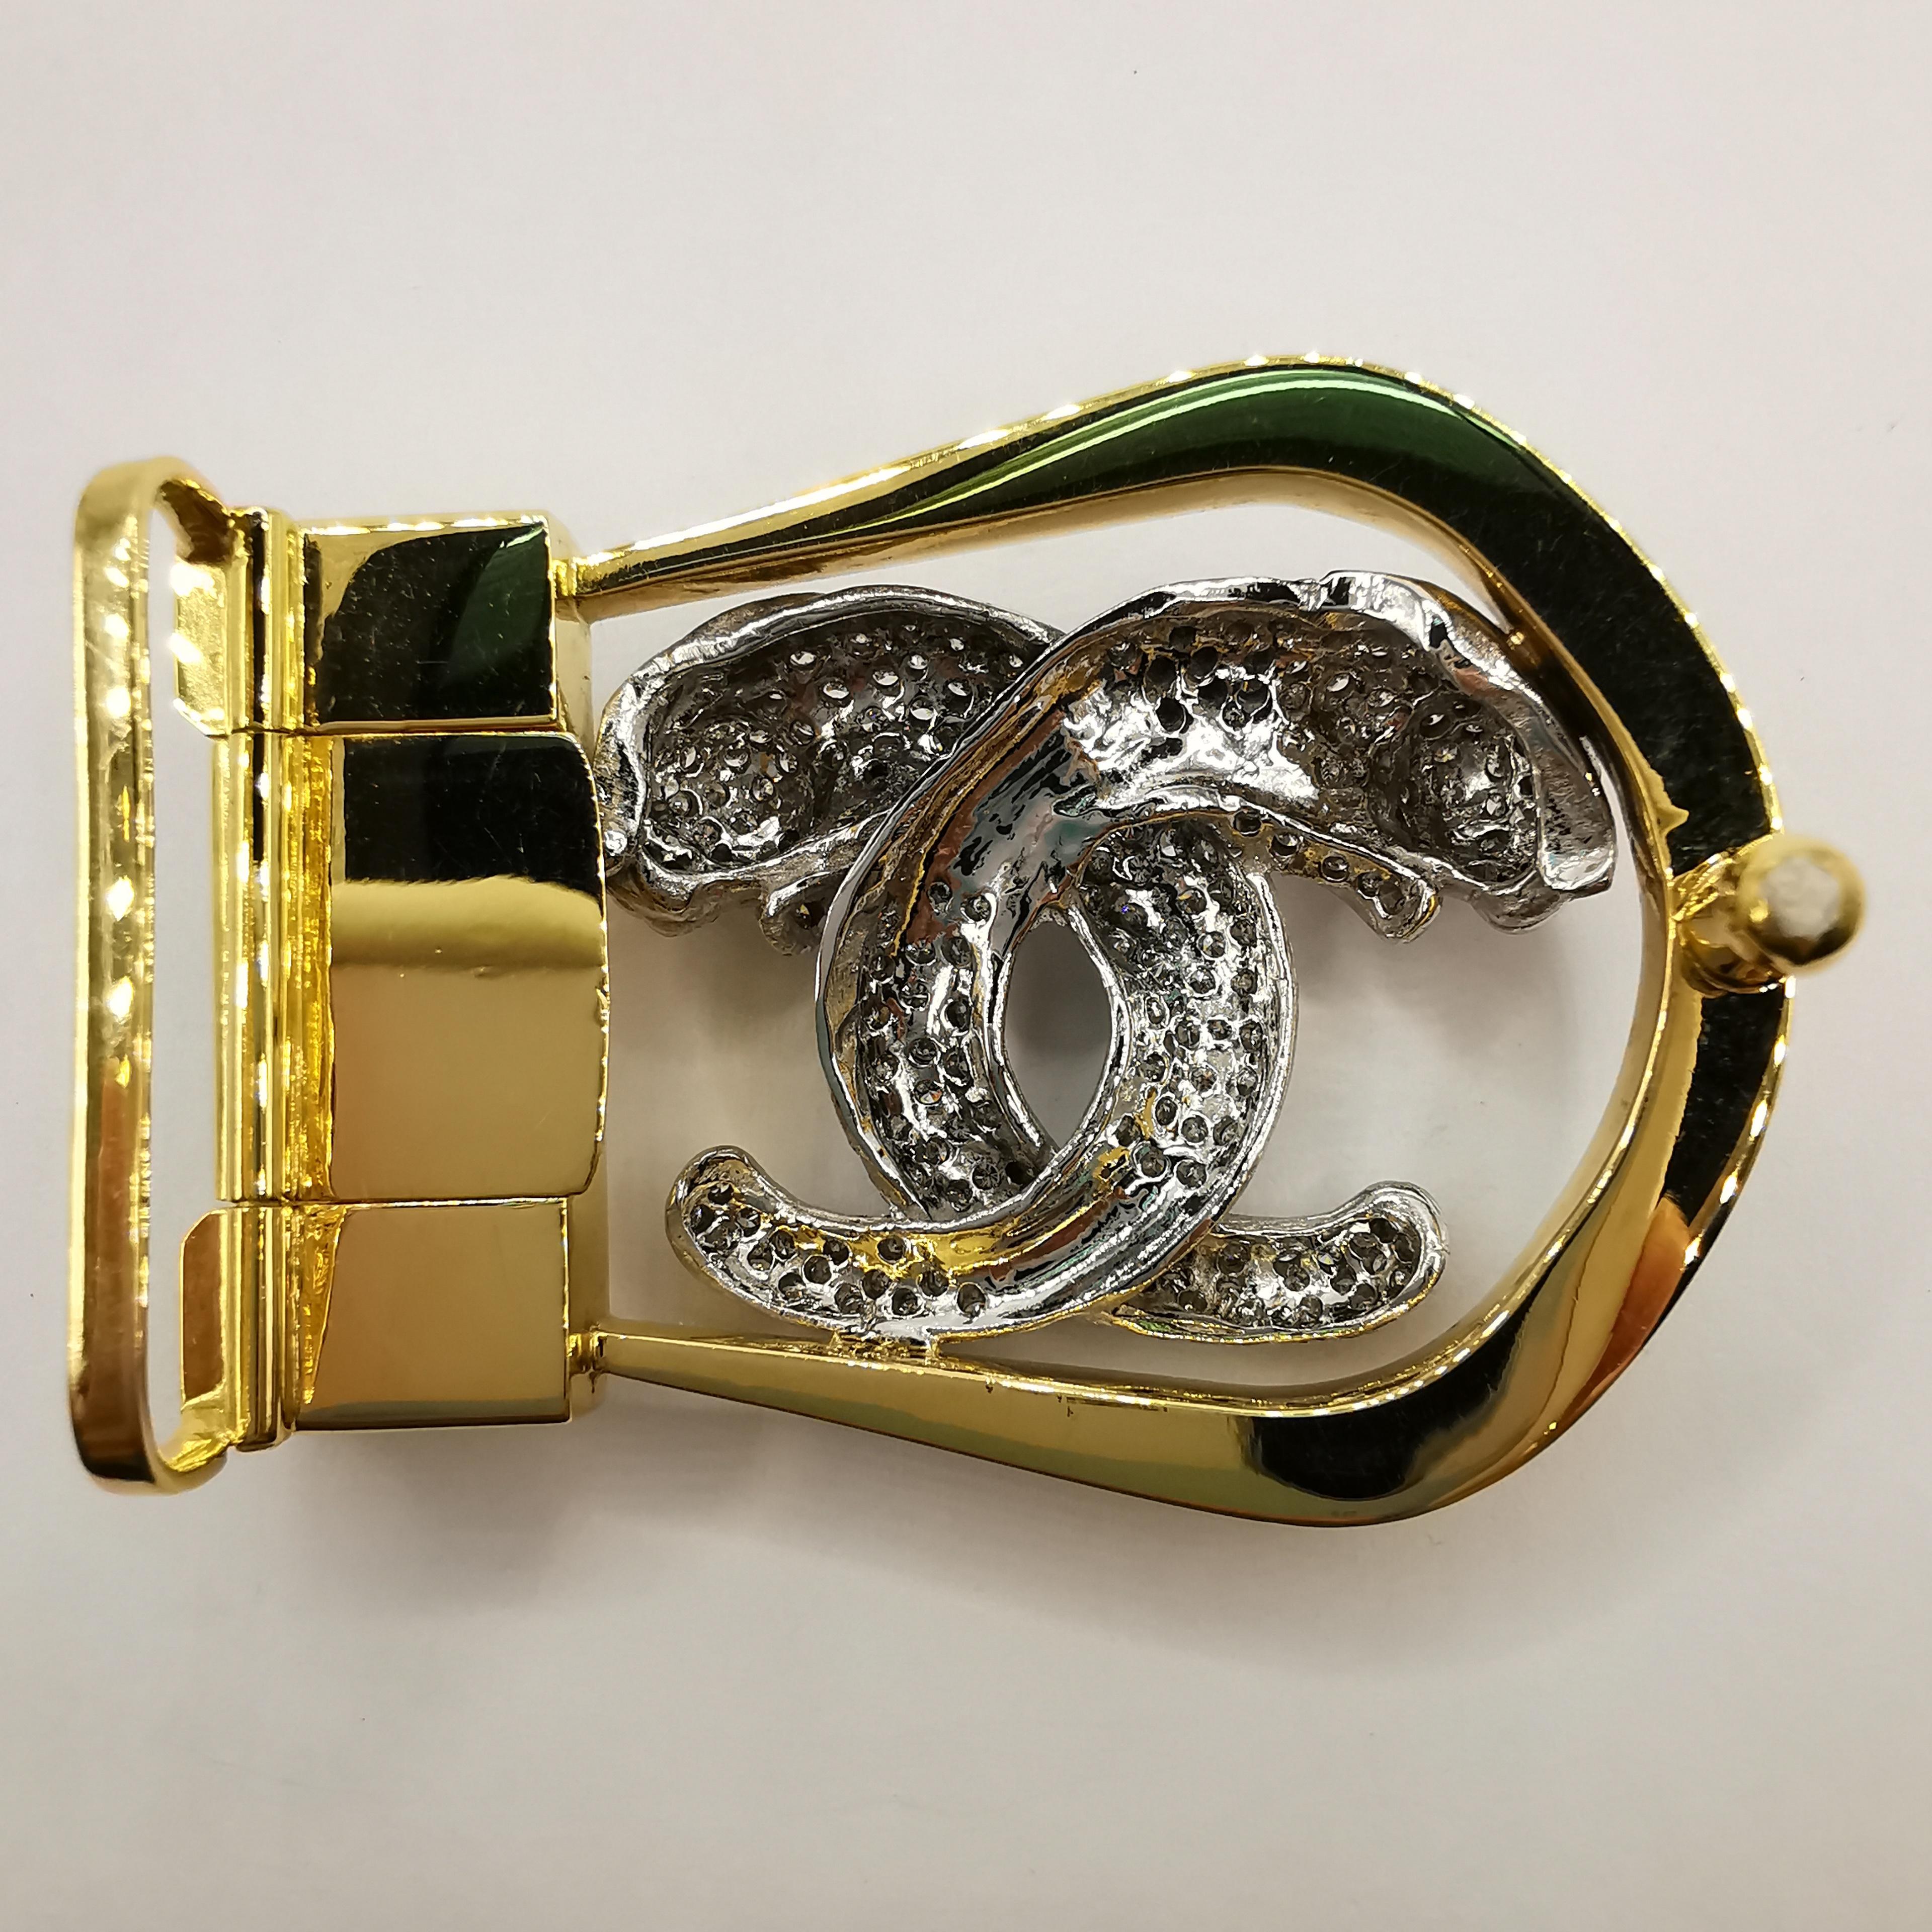 Round Cut Double Jaguar 1.74 Carat Diamond Belt Buckle in 18k Yellow and White Gold For Sale